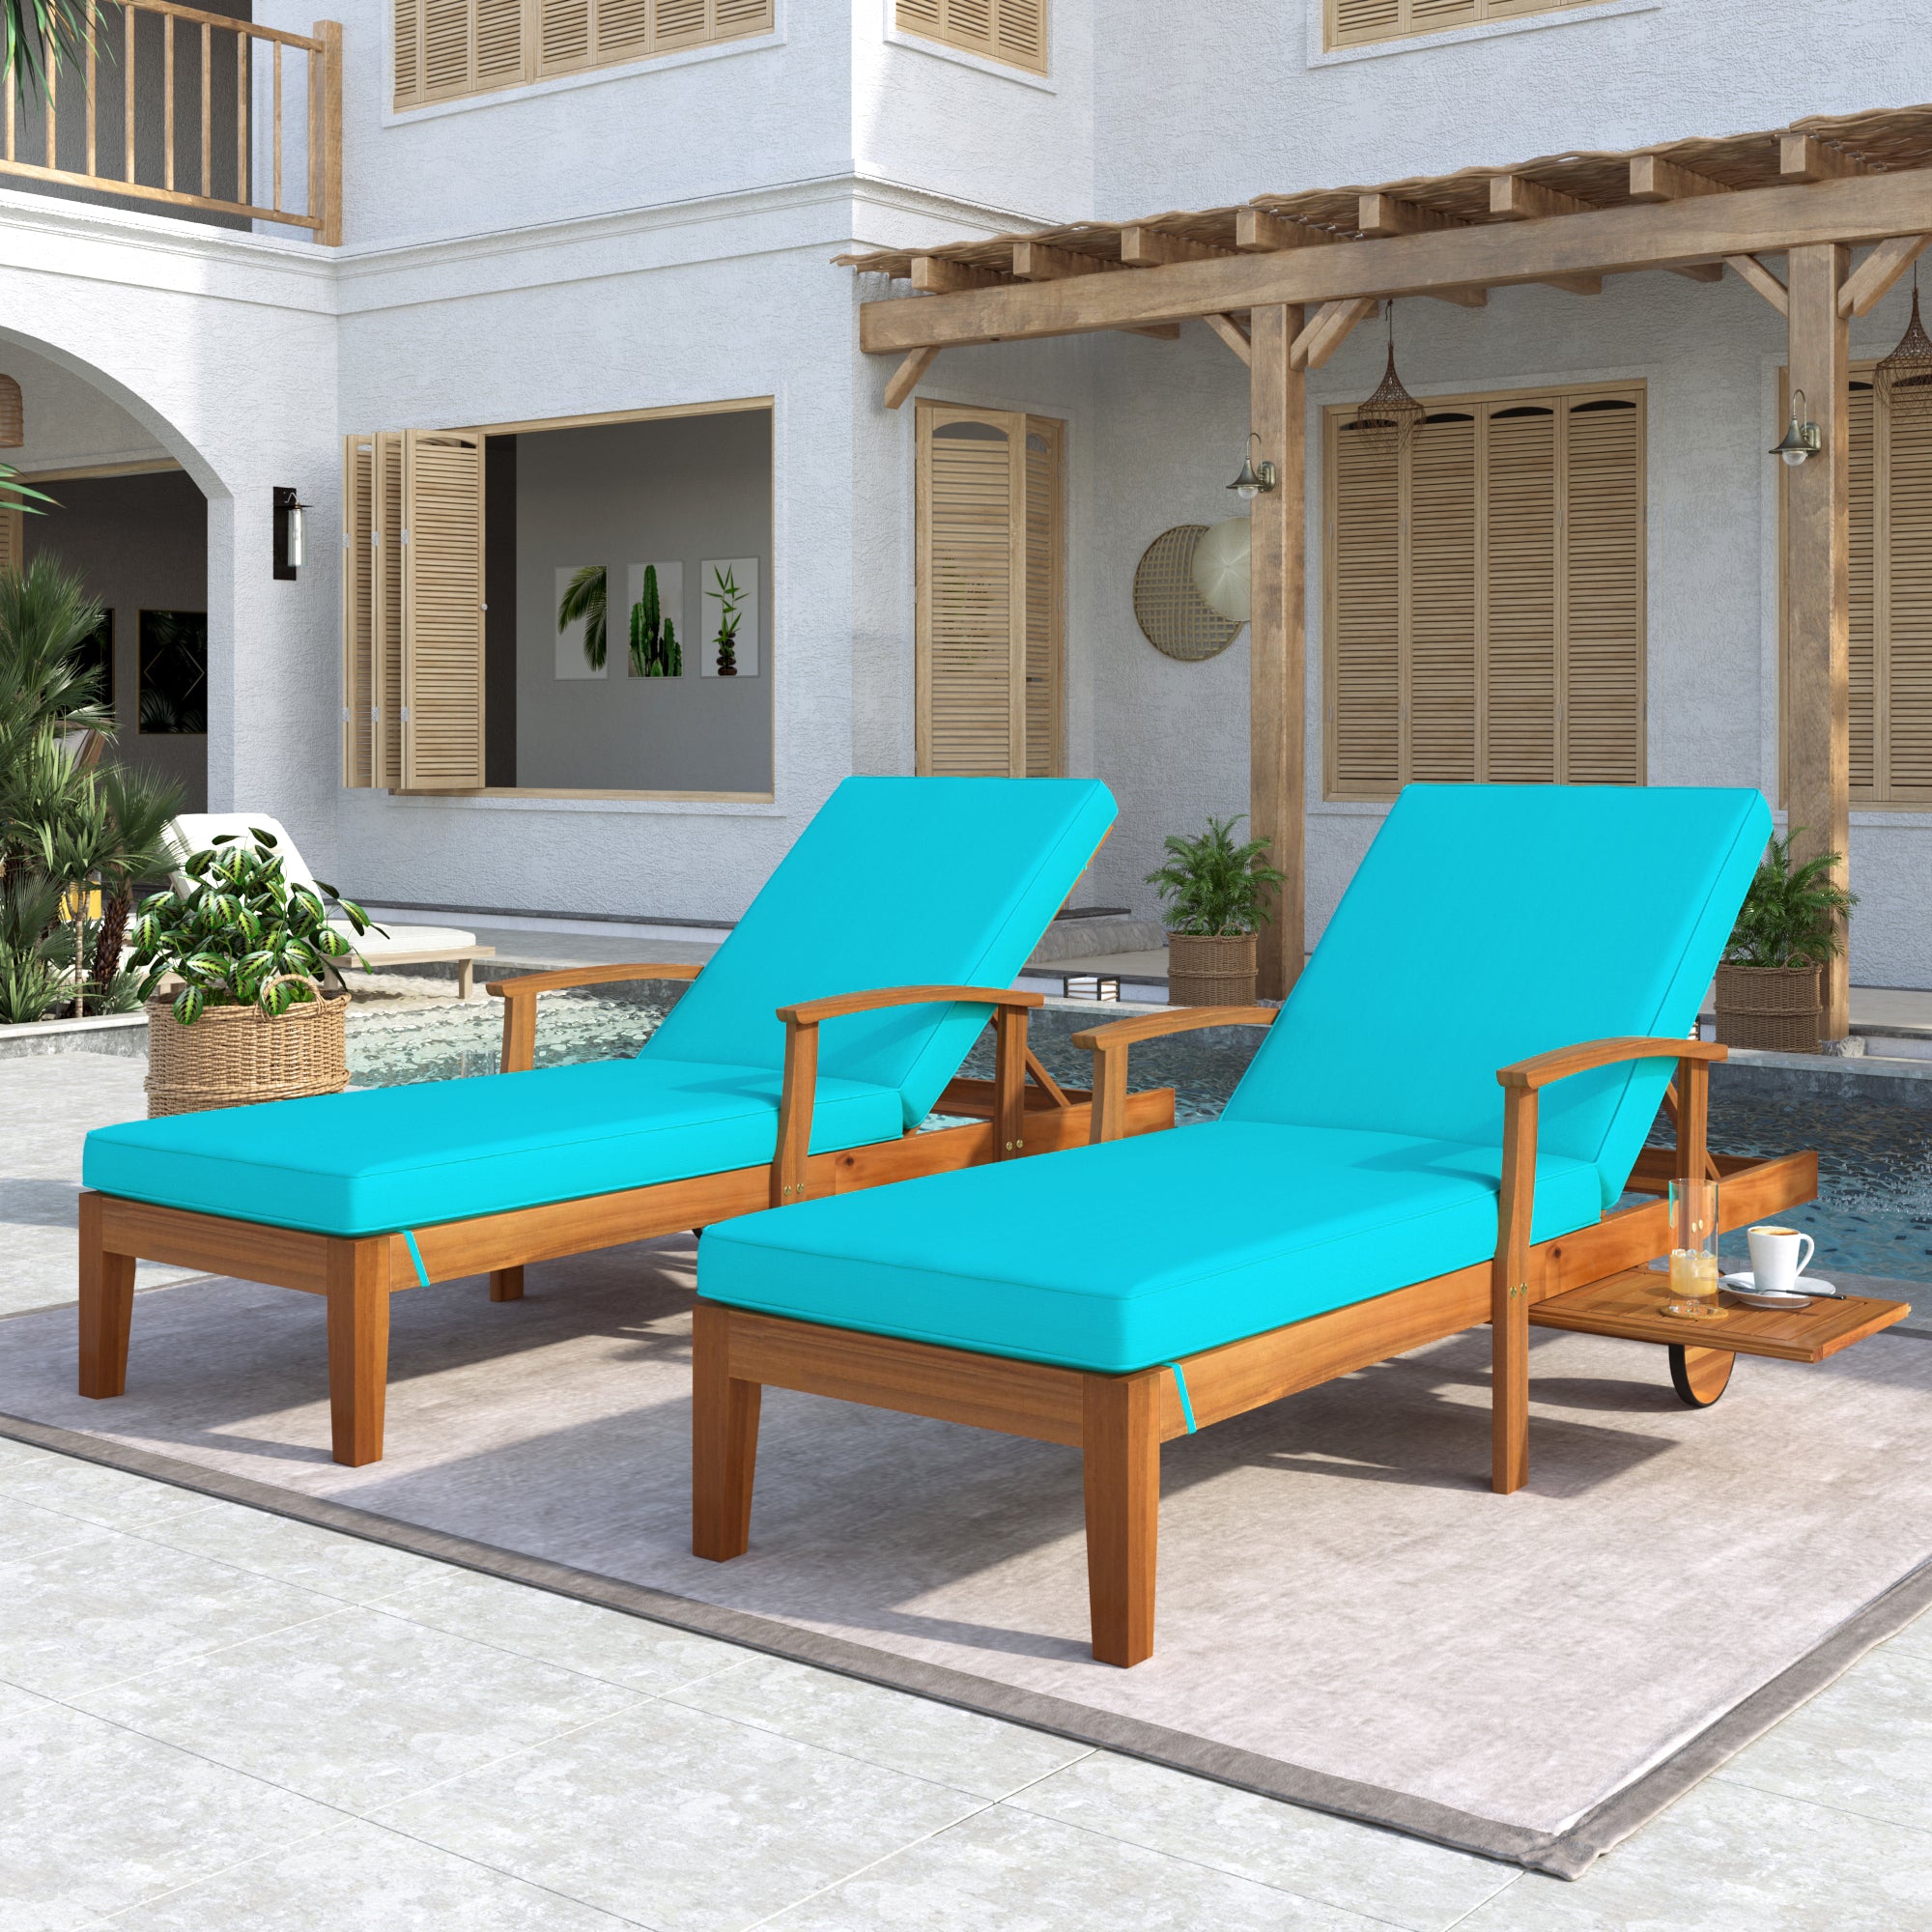 2 Pcs Outdoor Solid Wood Chaise Lounge 78.8" Patio Reclining Daybed with Cushion, Wheels and Sliding Cup Table & Bule Cushion